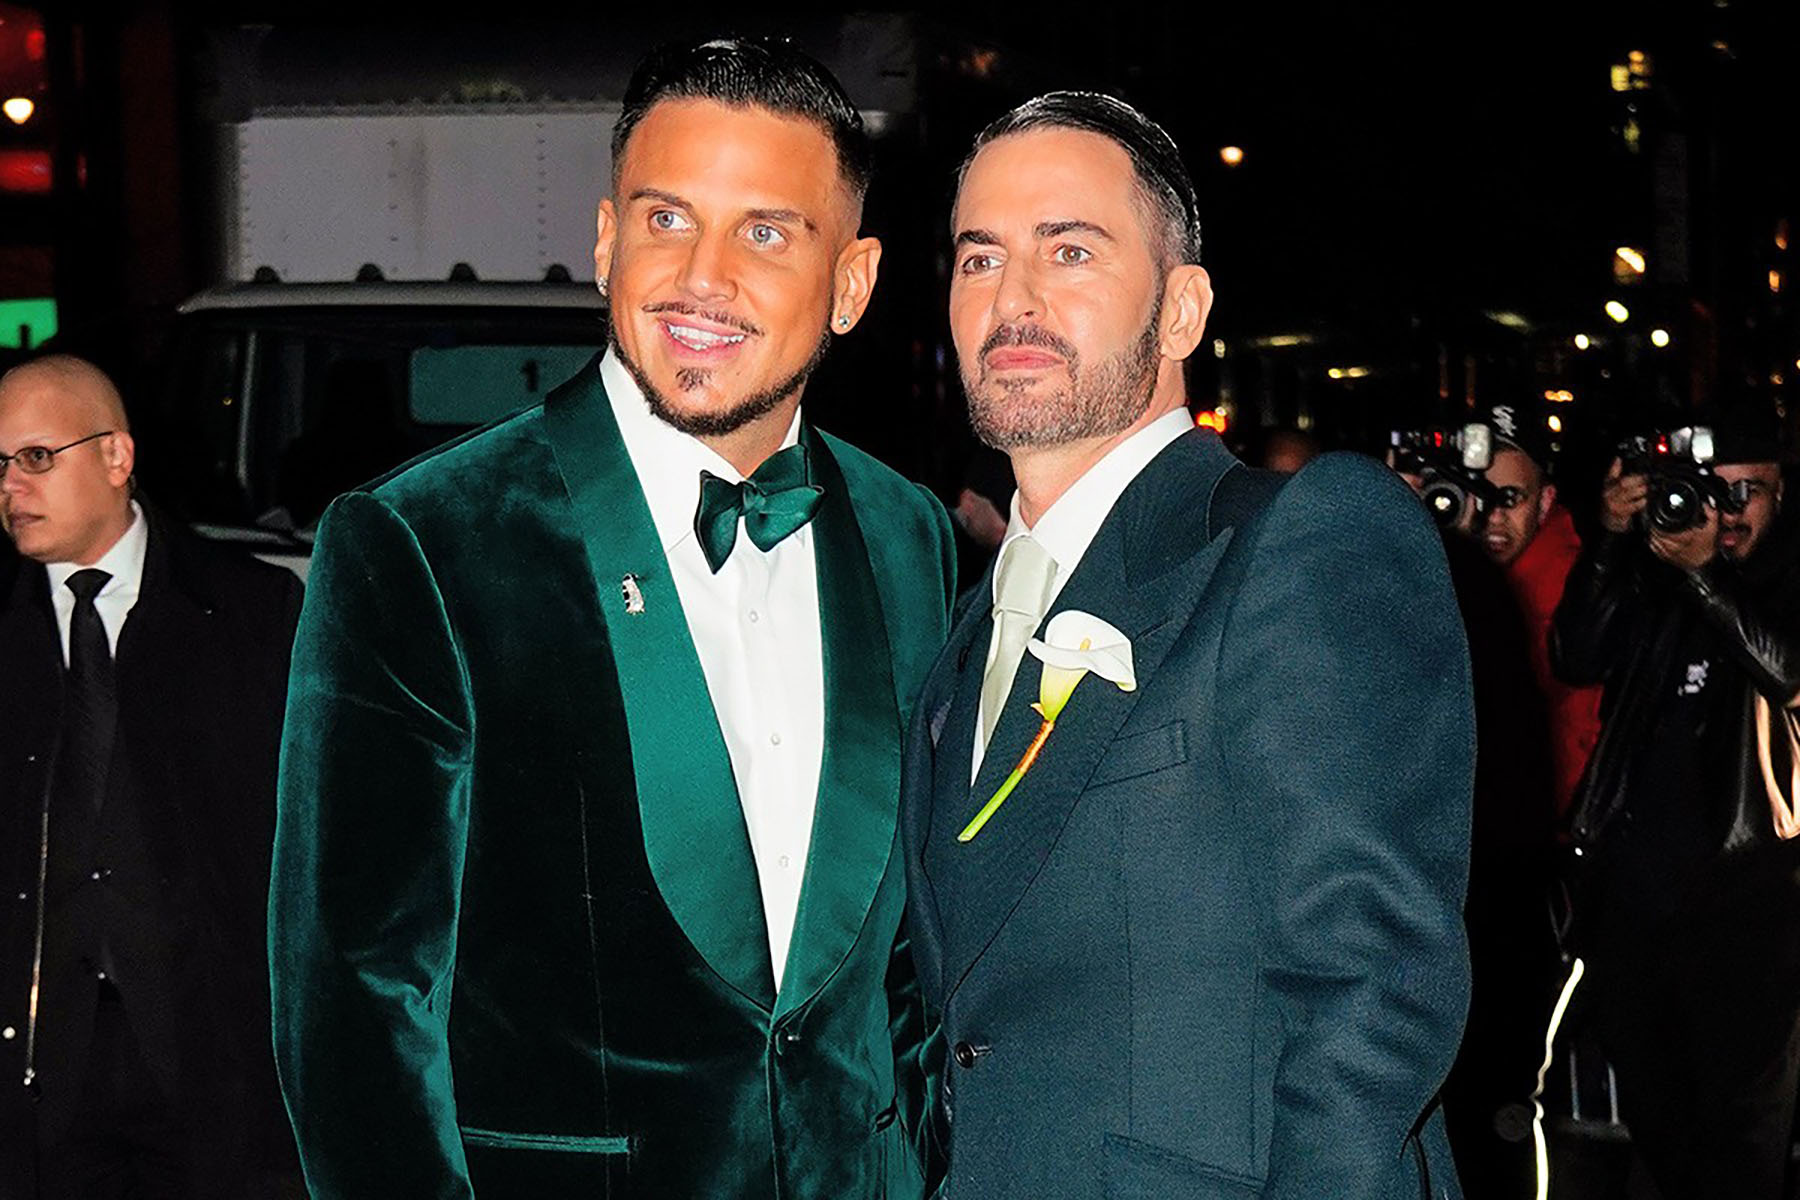 Marc Jacobs and his fiance Char Defrancesco look effortlessly